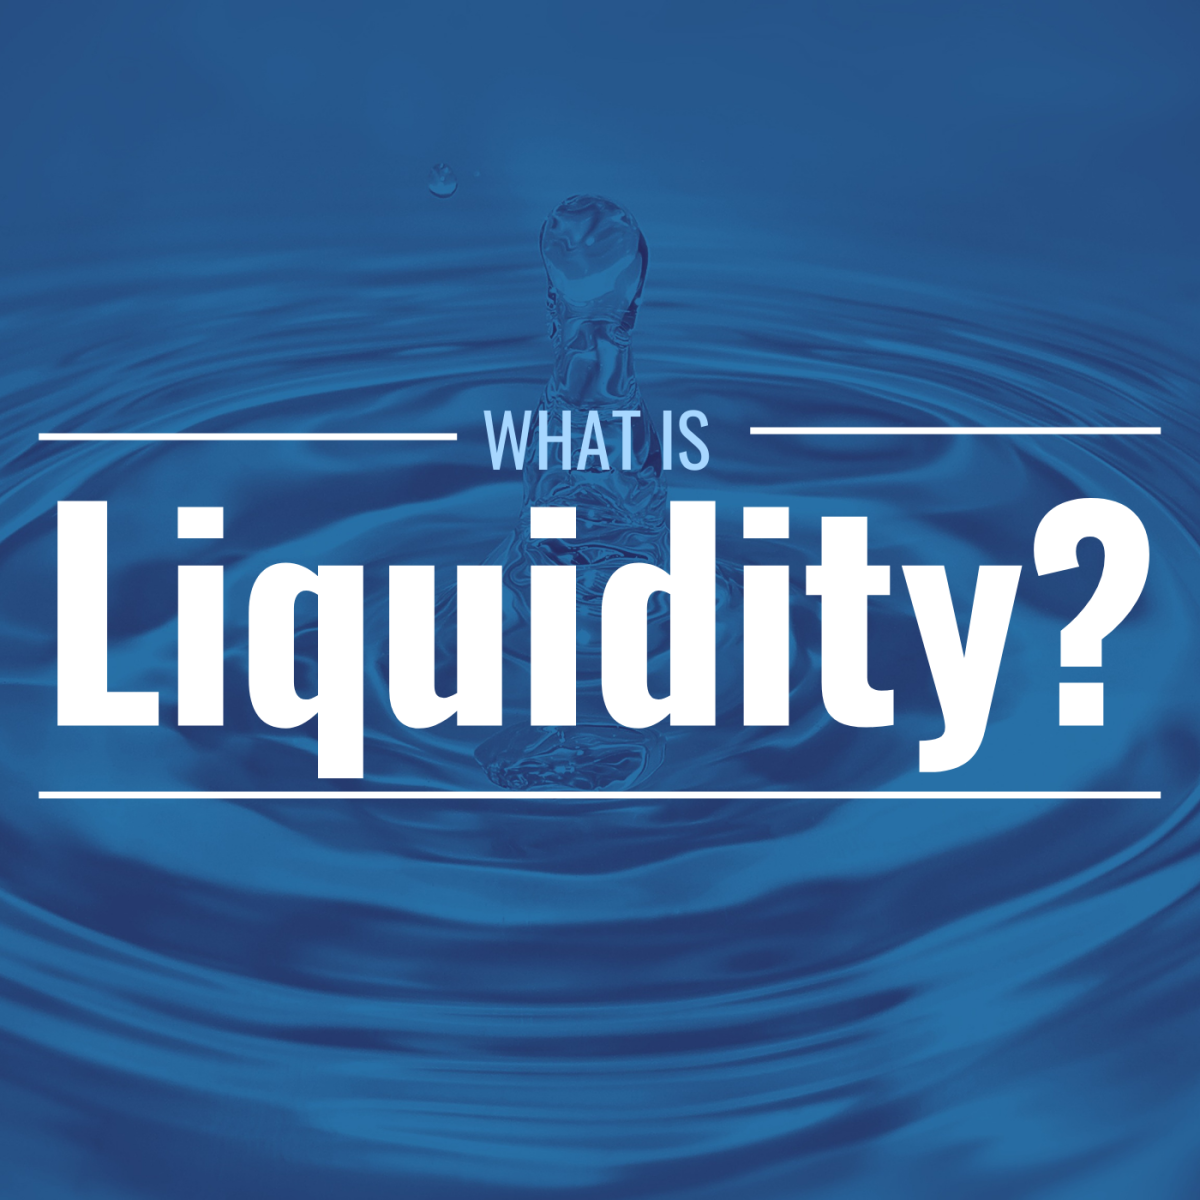 Image of ripples of water with the text overlay: "What Is Liquidity?”